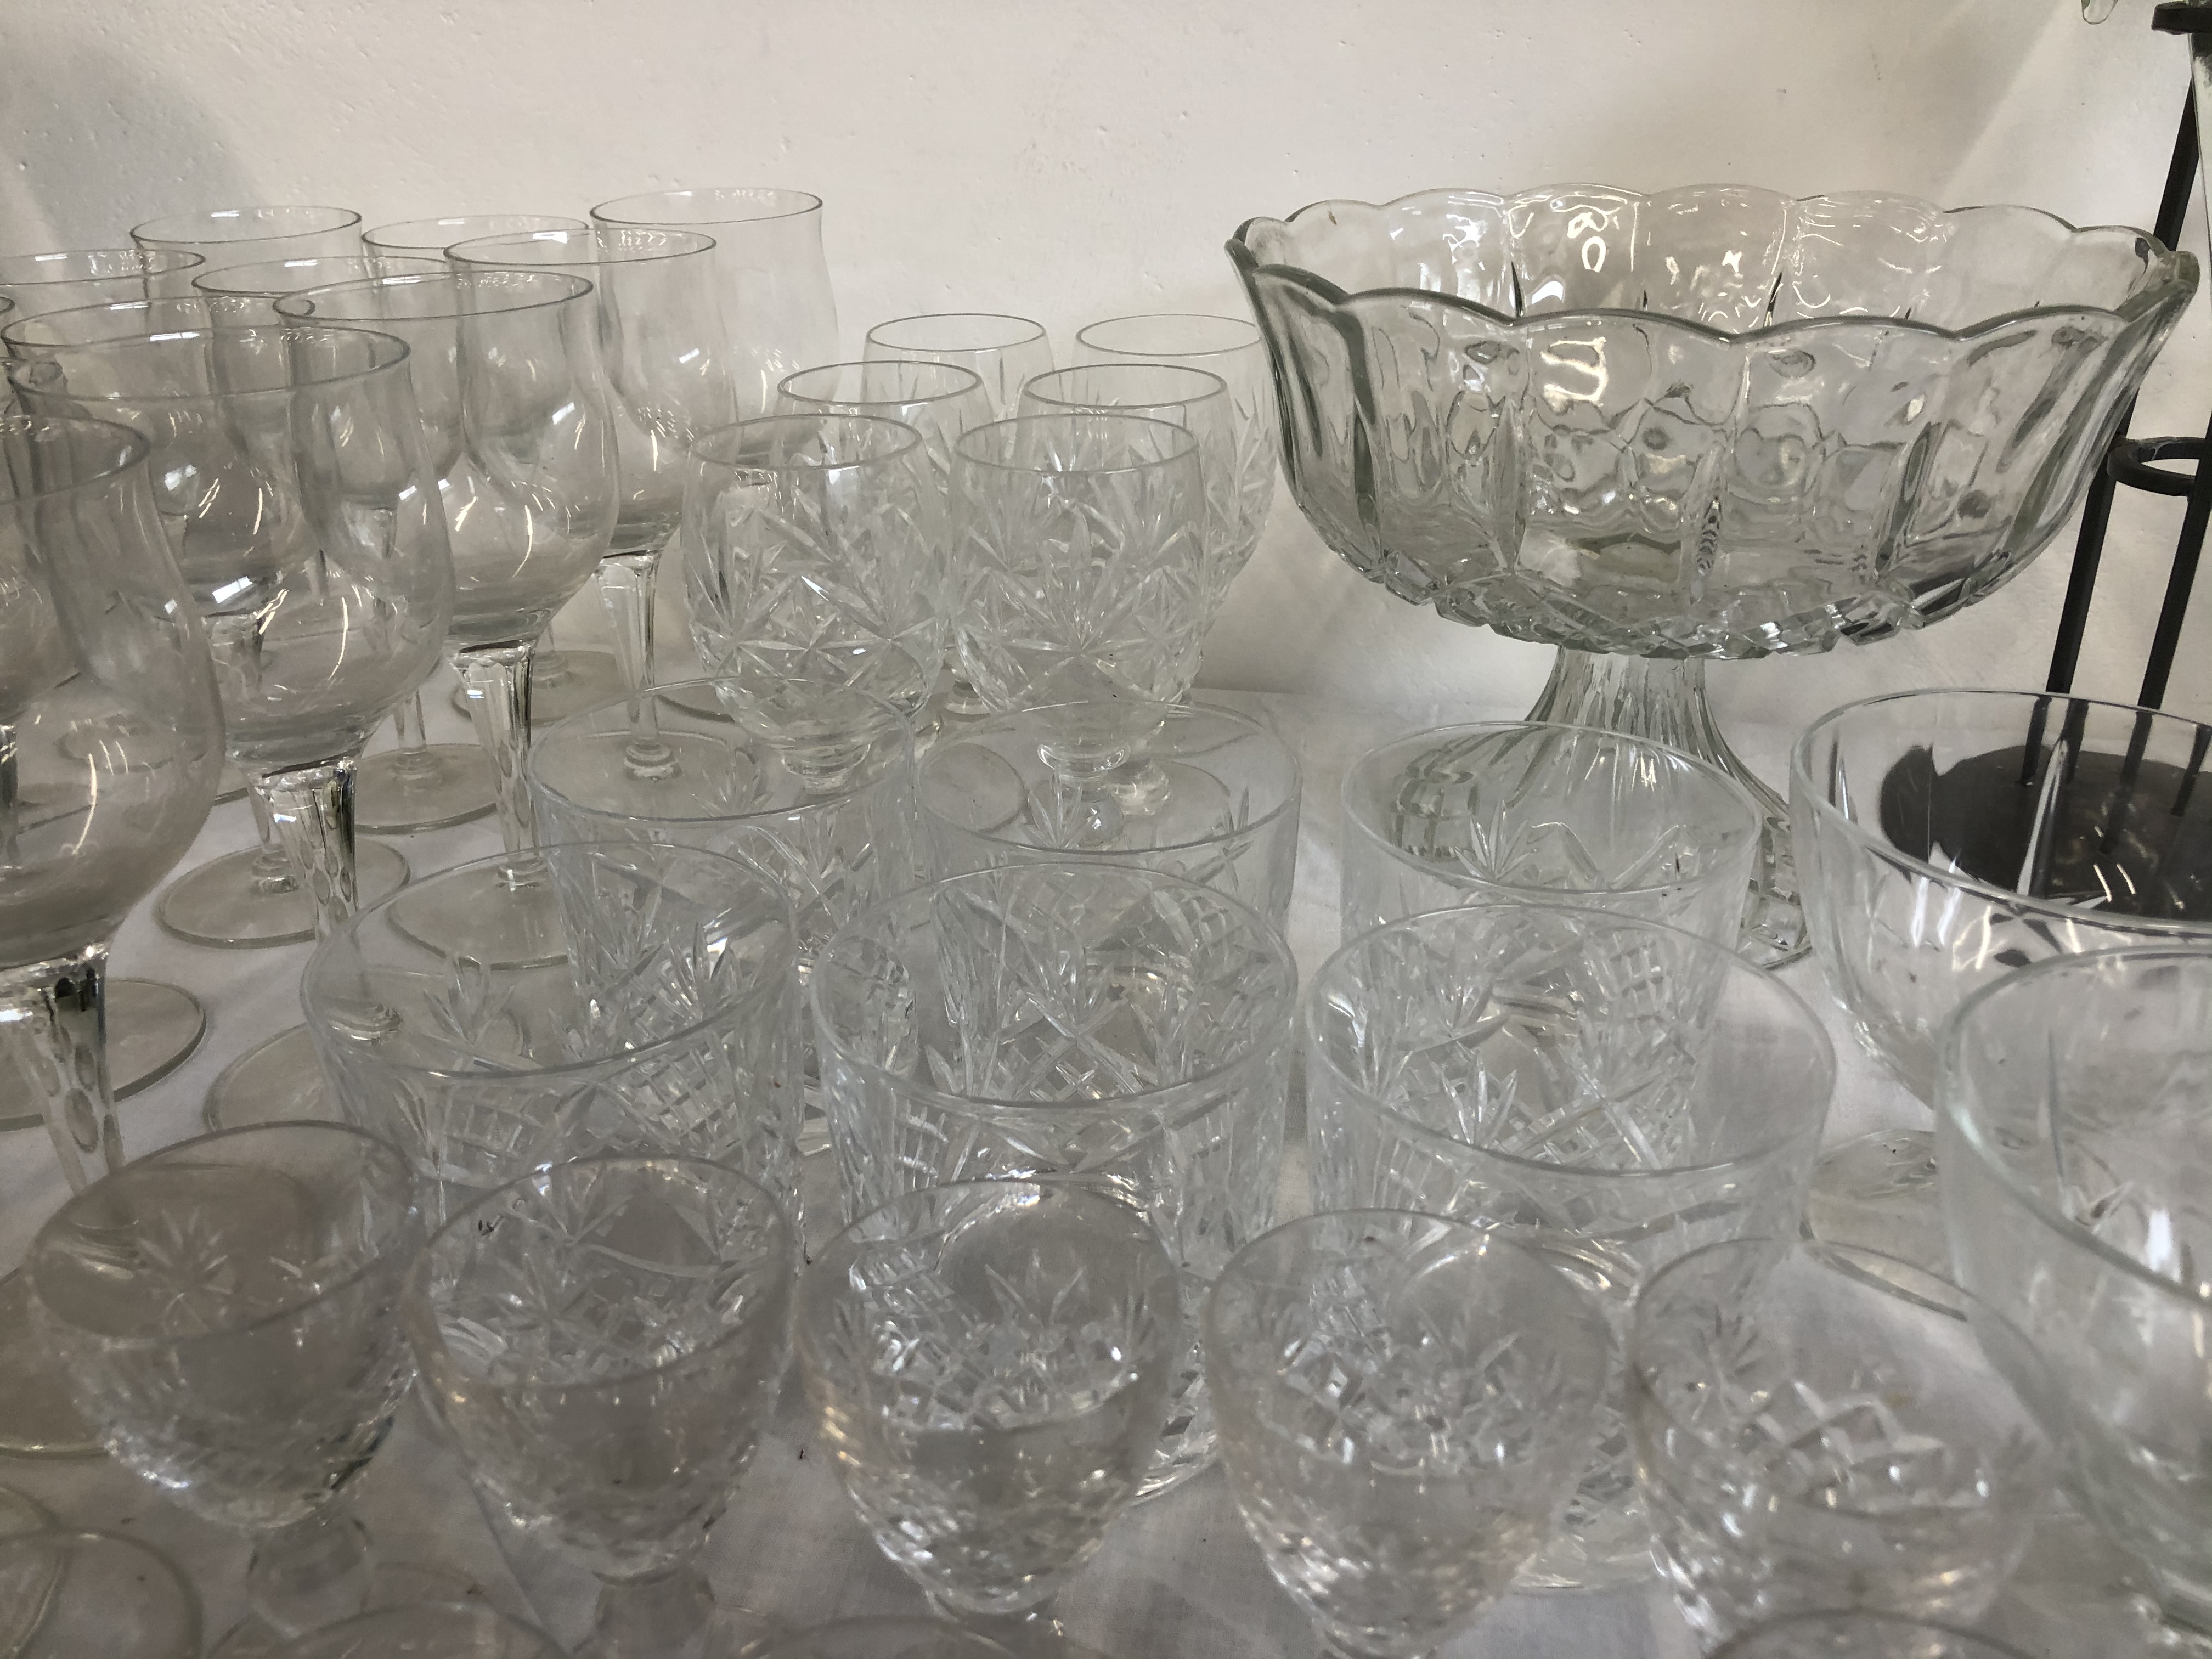 COLLECTION OF WINE GLASSES TO INCLUDE WATERFORD CRYSTAL (ALL HALF DOZENS OR MORE) PLUS 6 CUT GLASS - Image 2 of 4